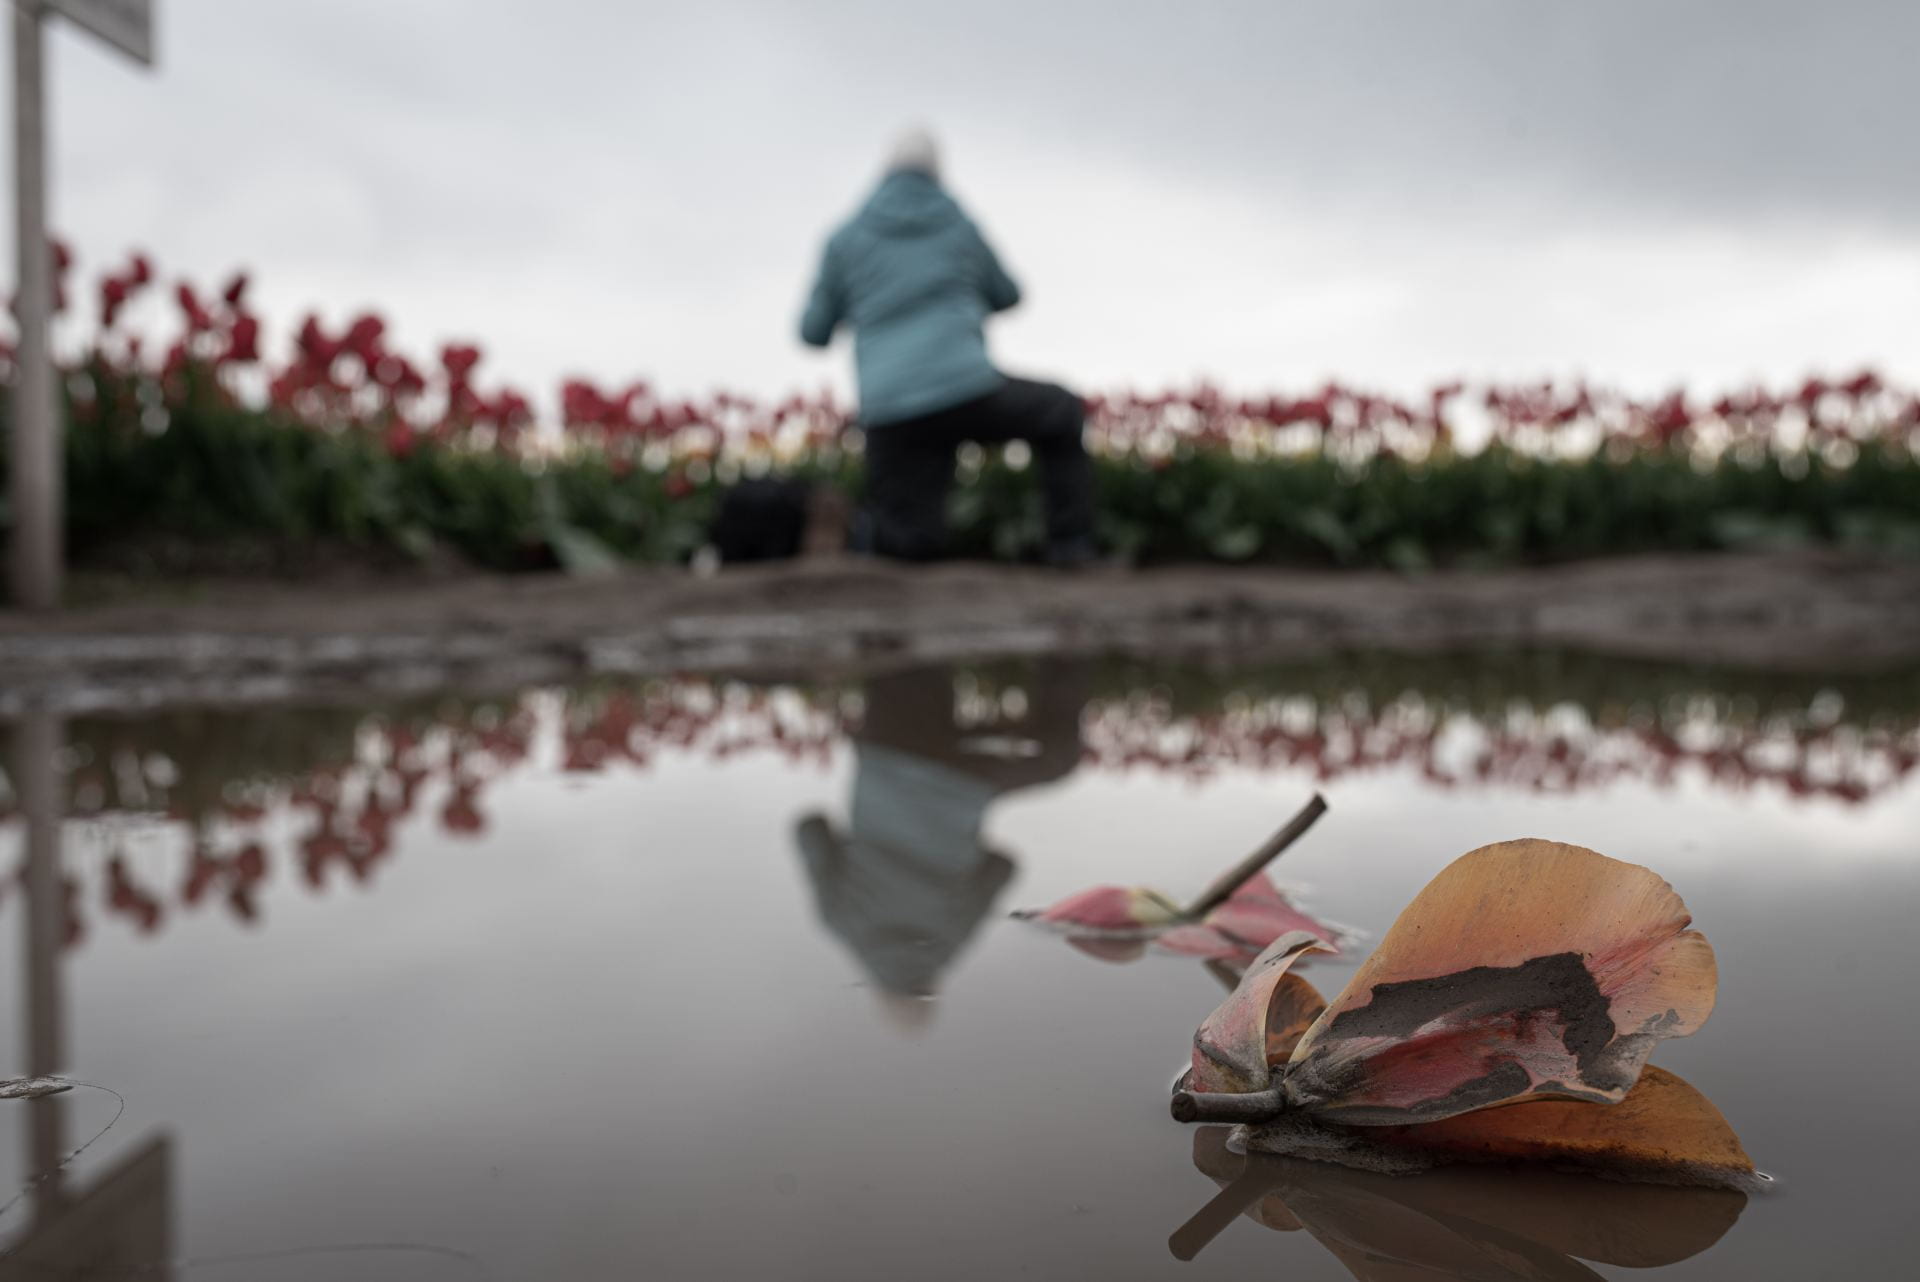 close-up of a tulip head in a puddle. In the blurry distance, a person kneels in front of a tulip field